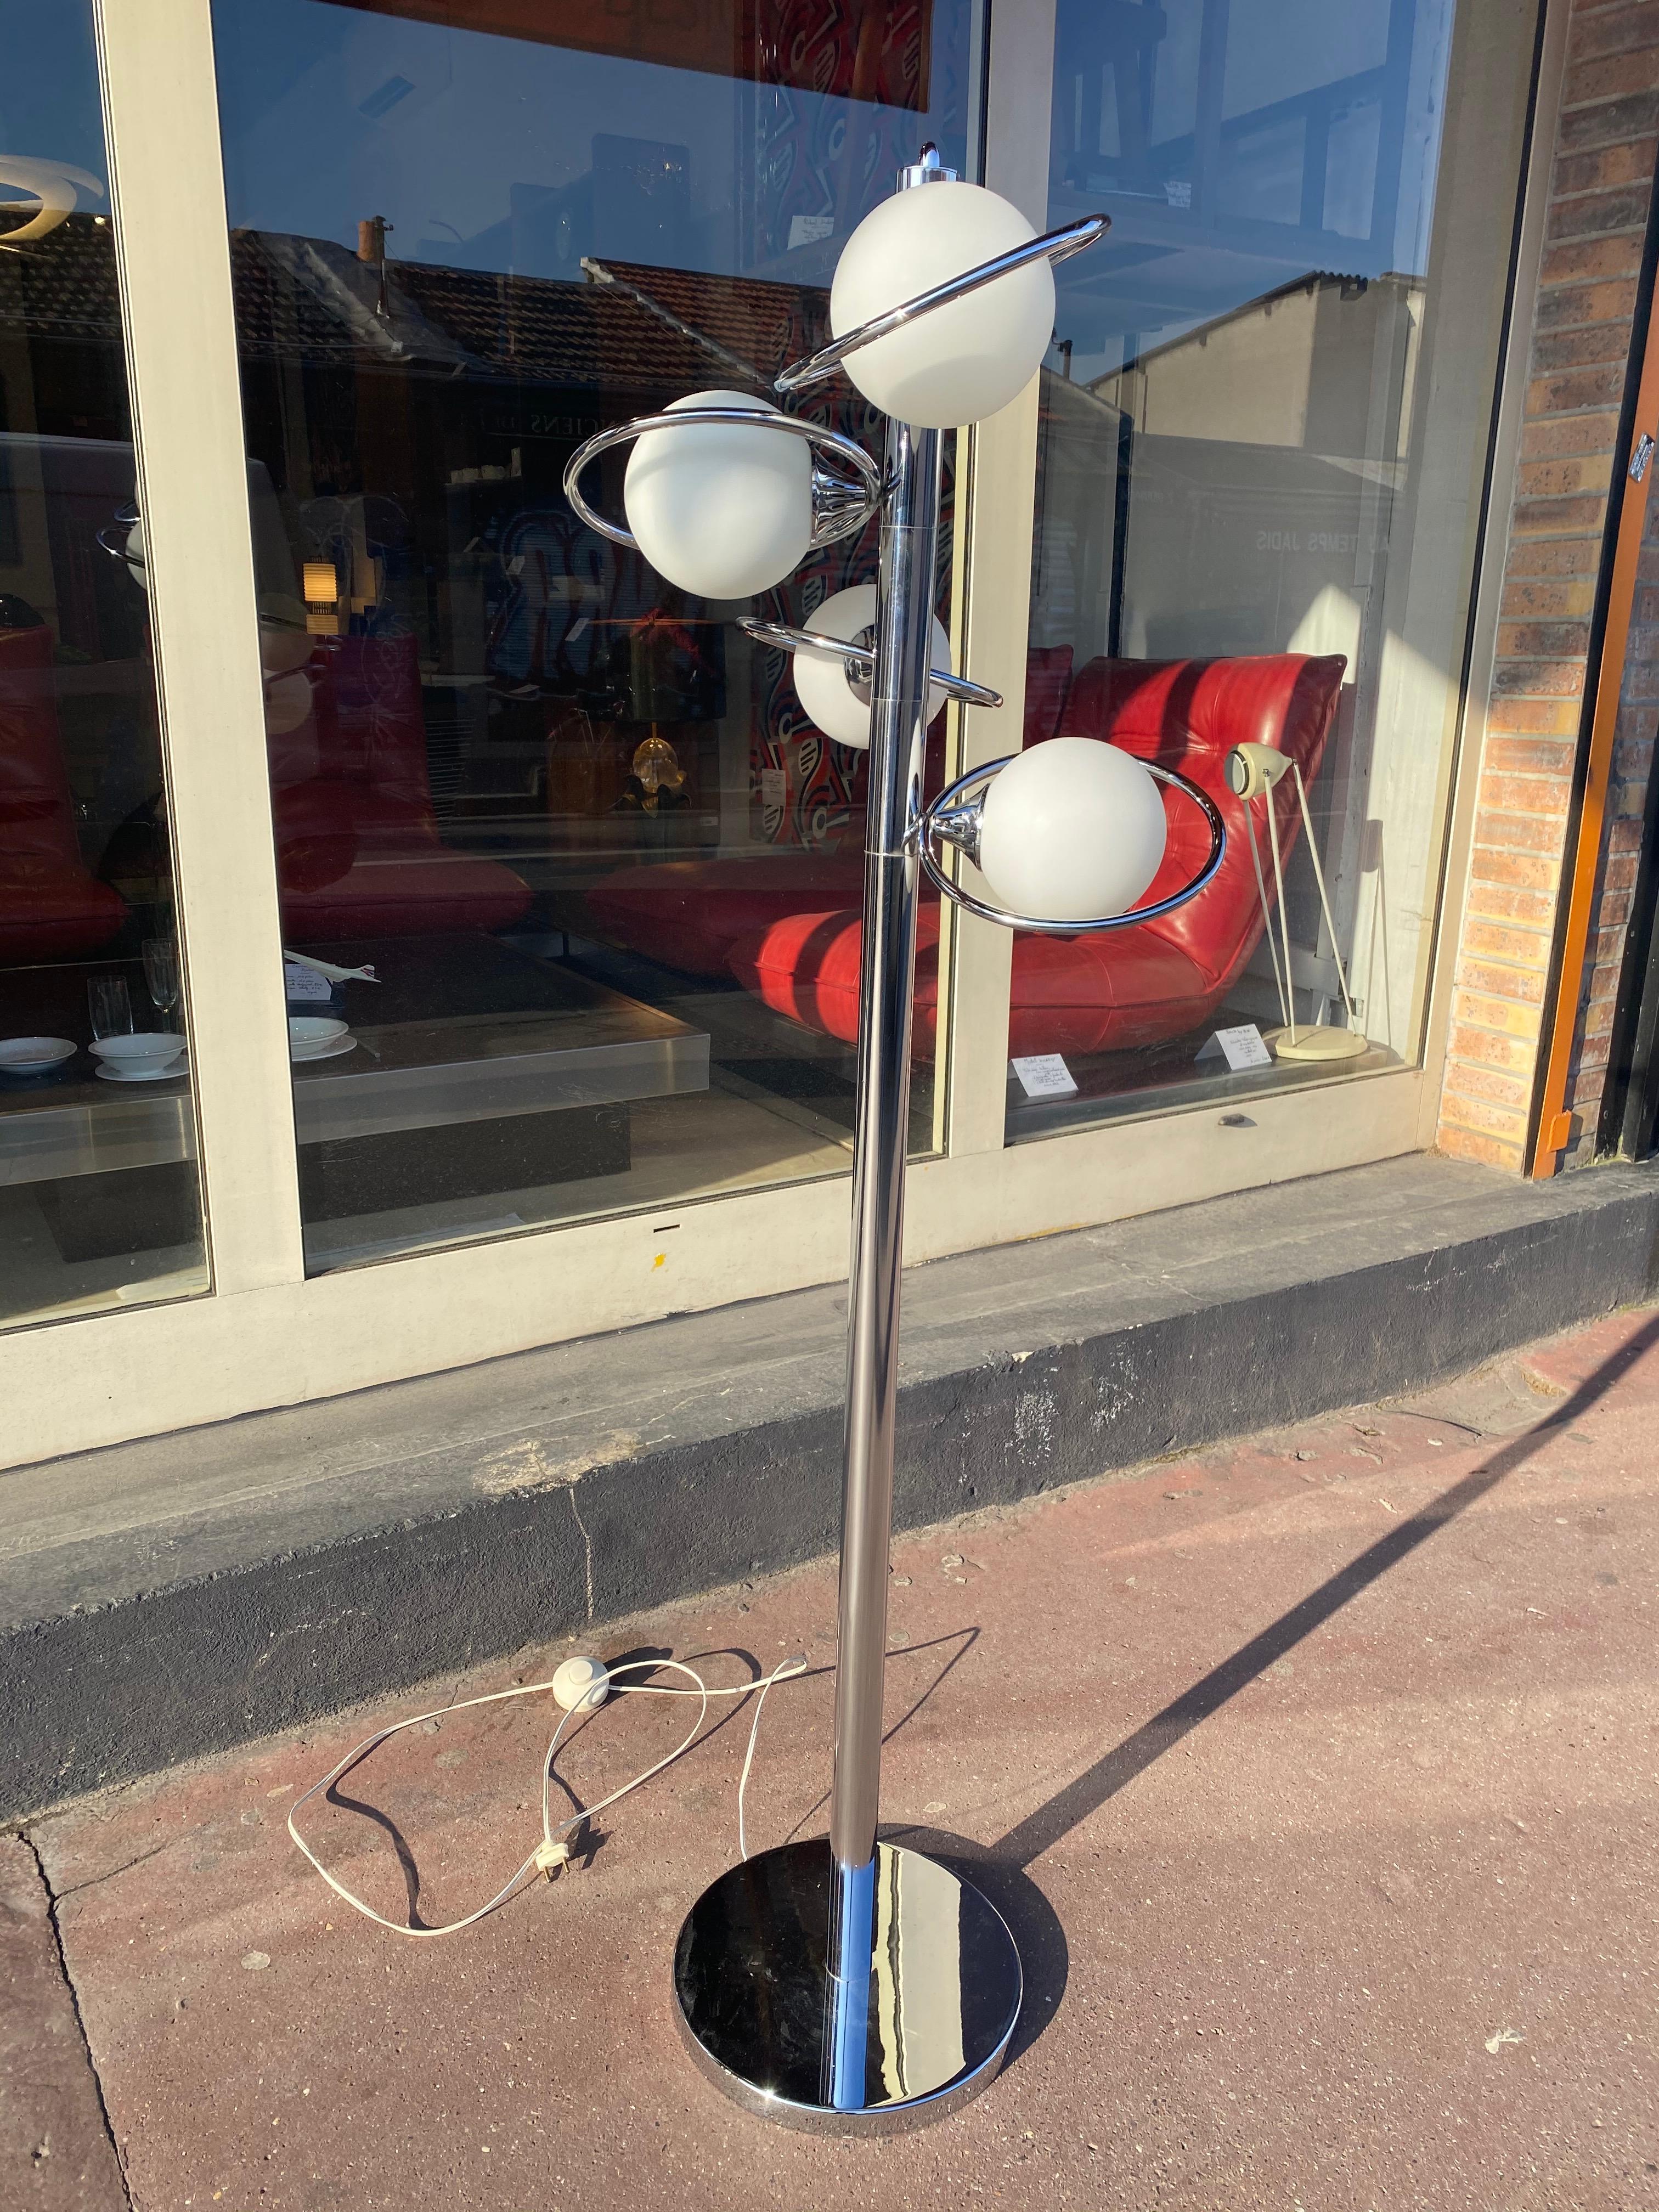 Reggiani
Cosmos floor lamp,
circa 1972

Stainless steel and glass
4 luminous globes

Measures: 142 x 50 x 50 cms
In a beautiful condition.